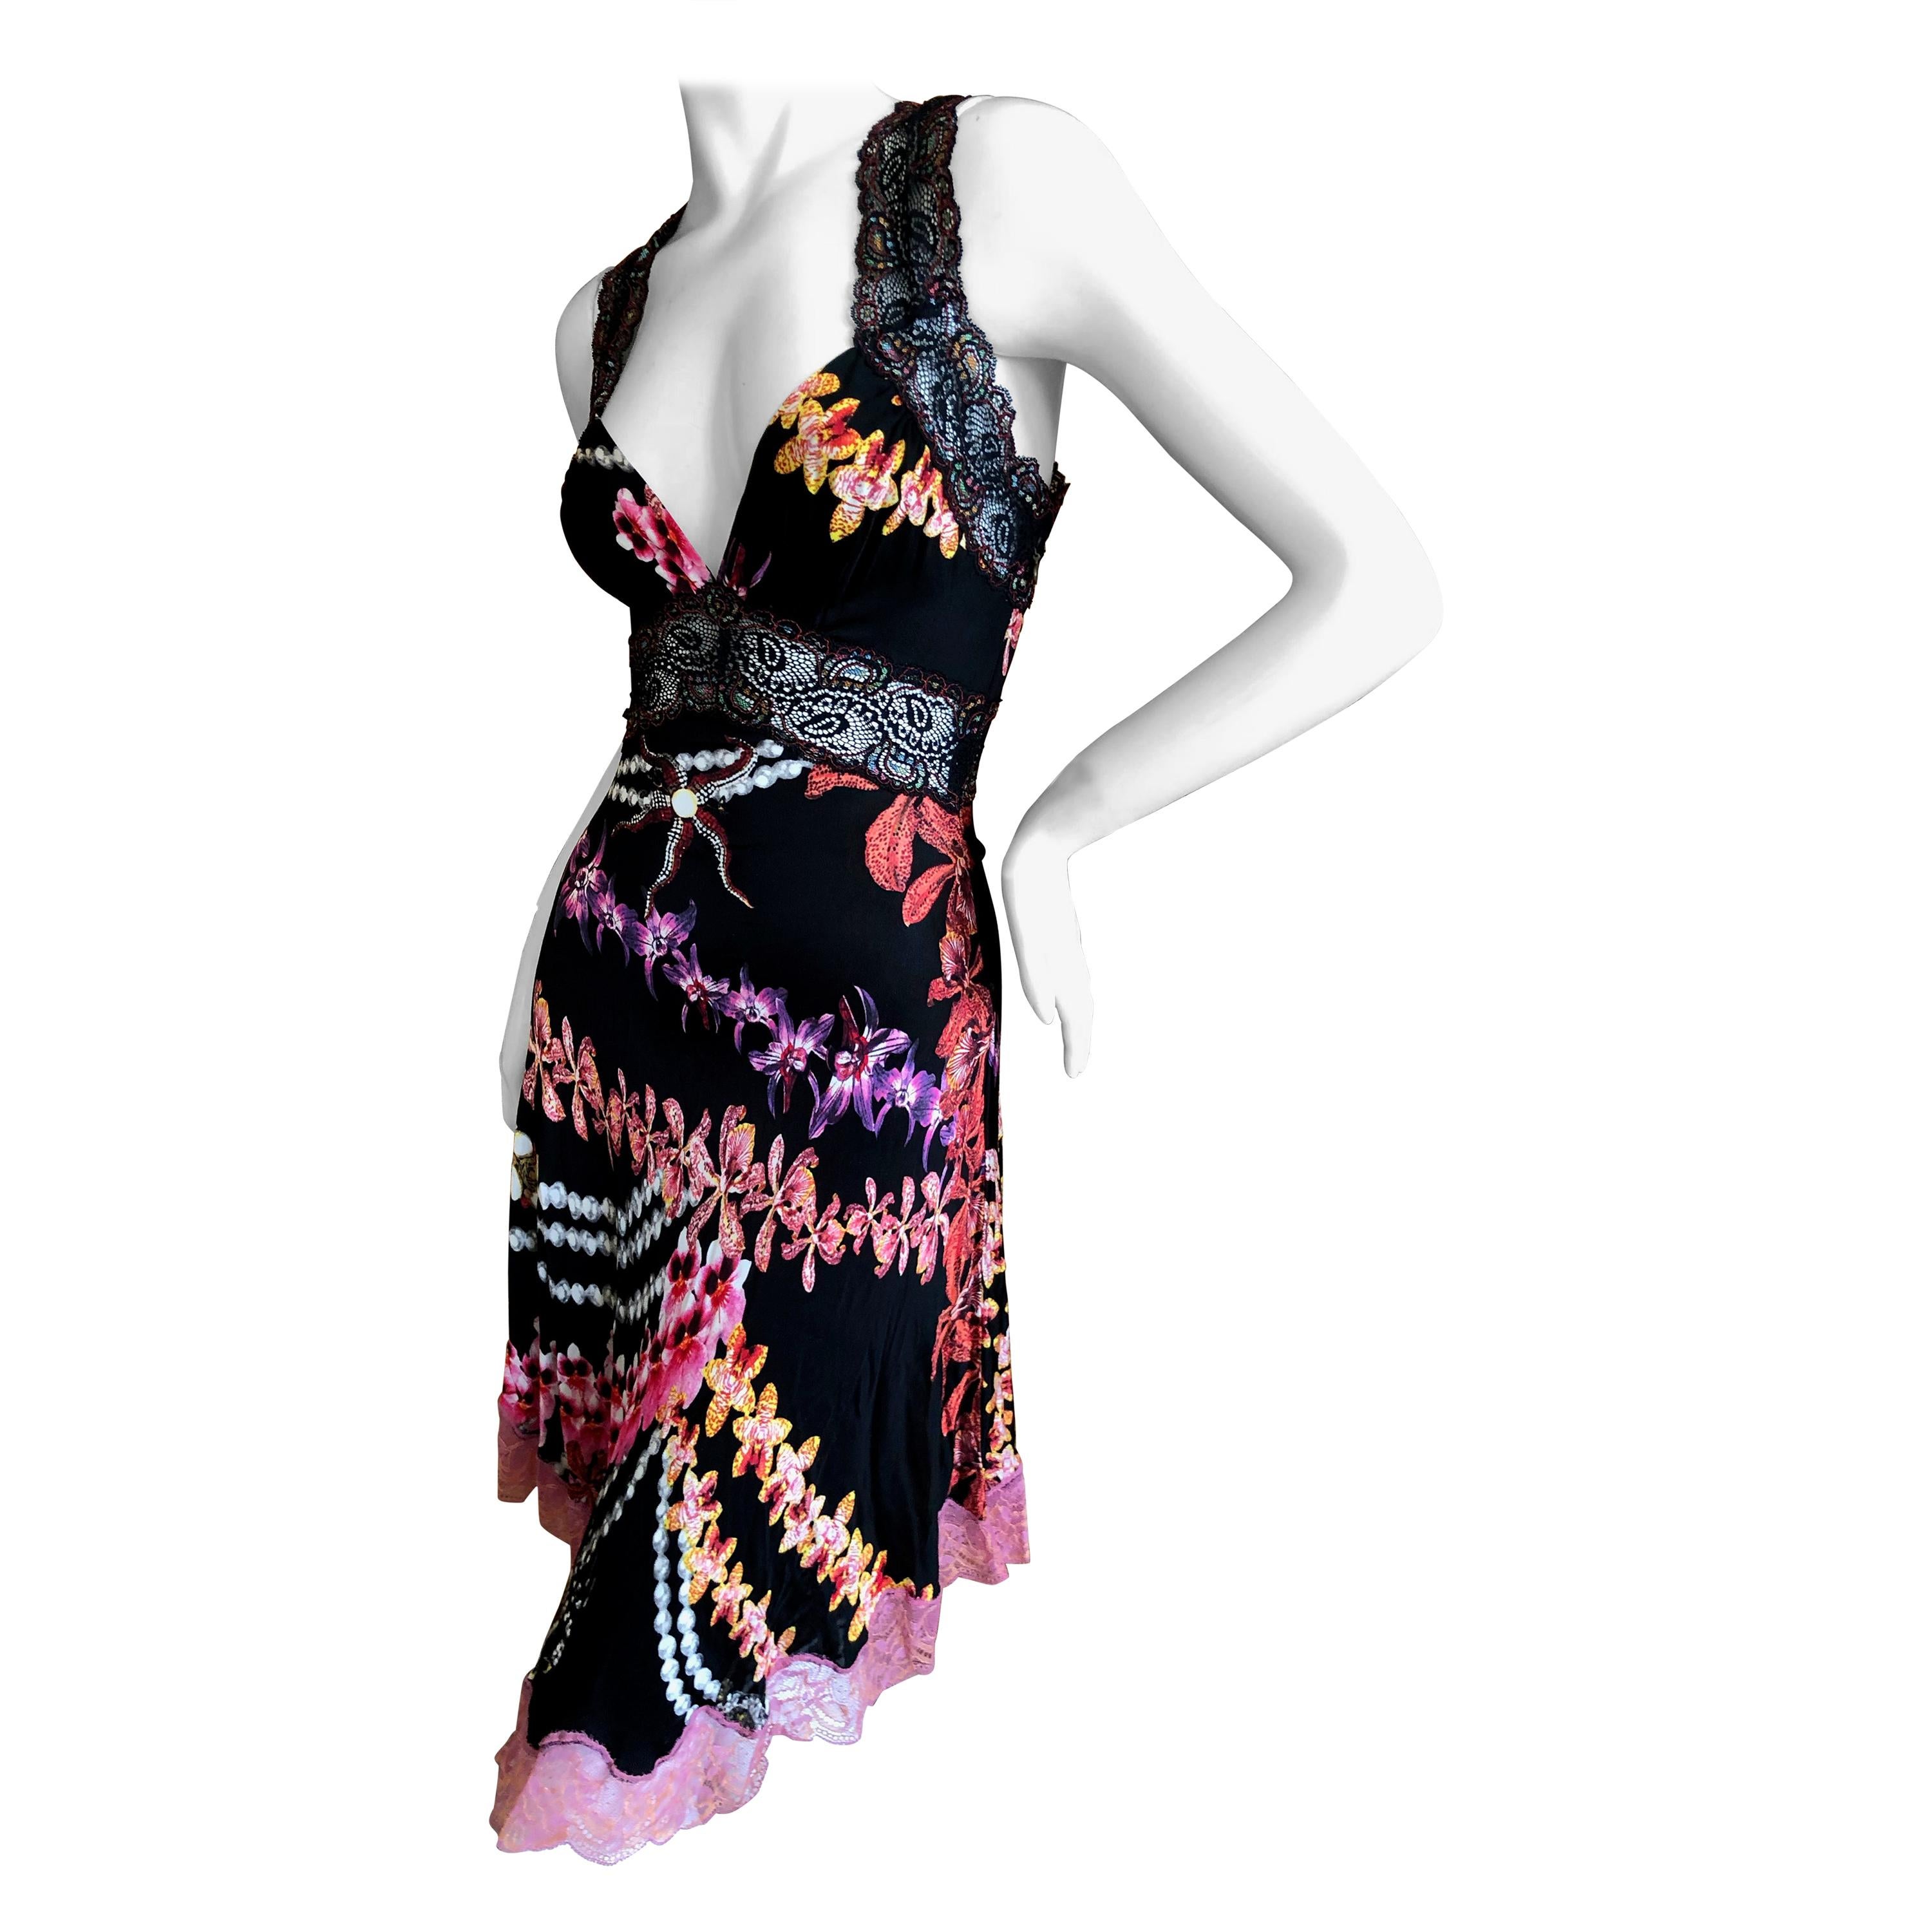 Roberto Cavalli Just Cavalli Orchid Print Lace Trim Racer Back Cocktail Dress For Sale